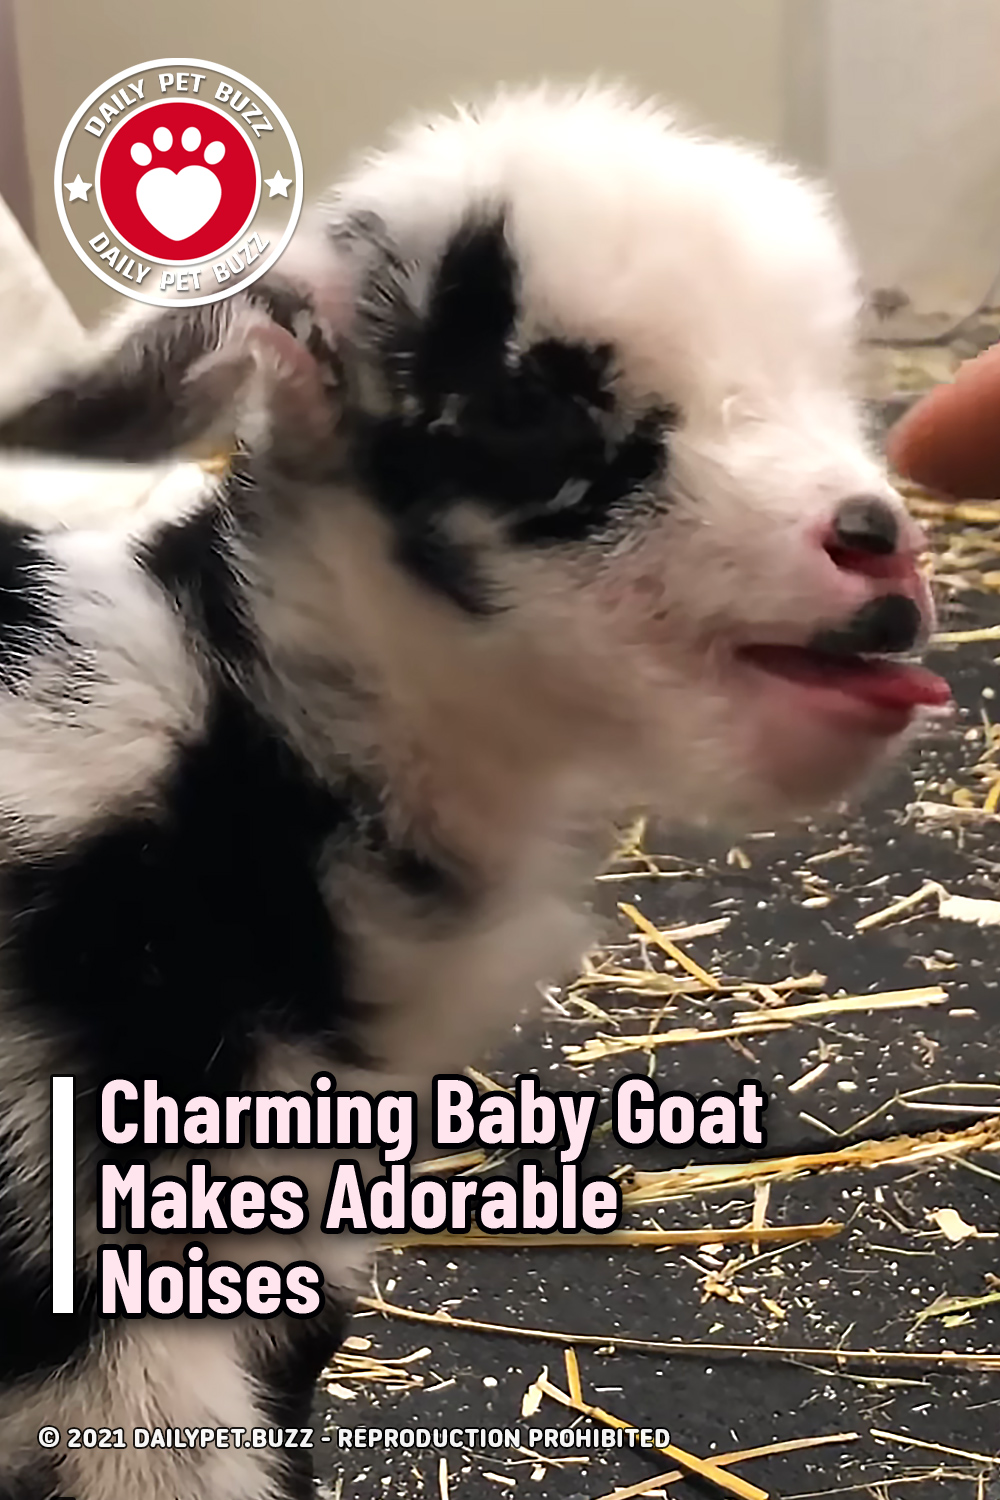 Charming Baby Goat Makes Adorable Noises